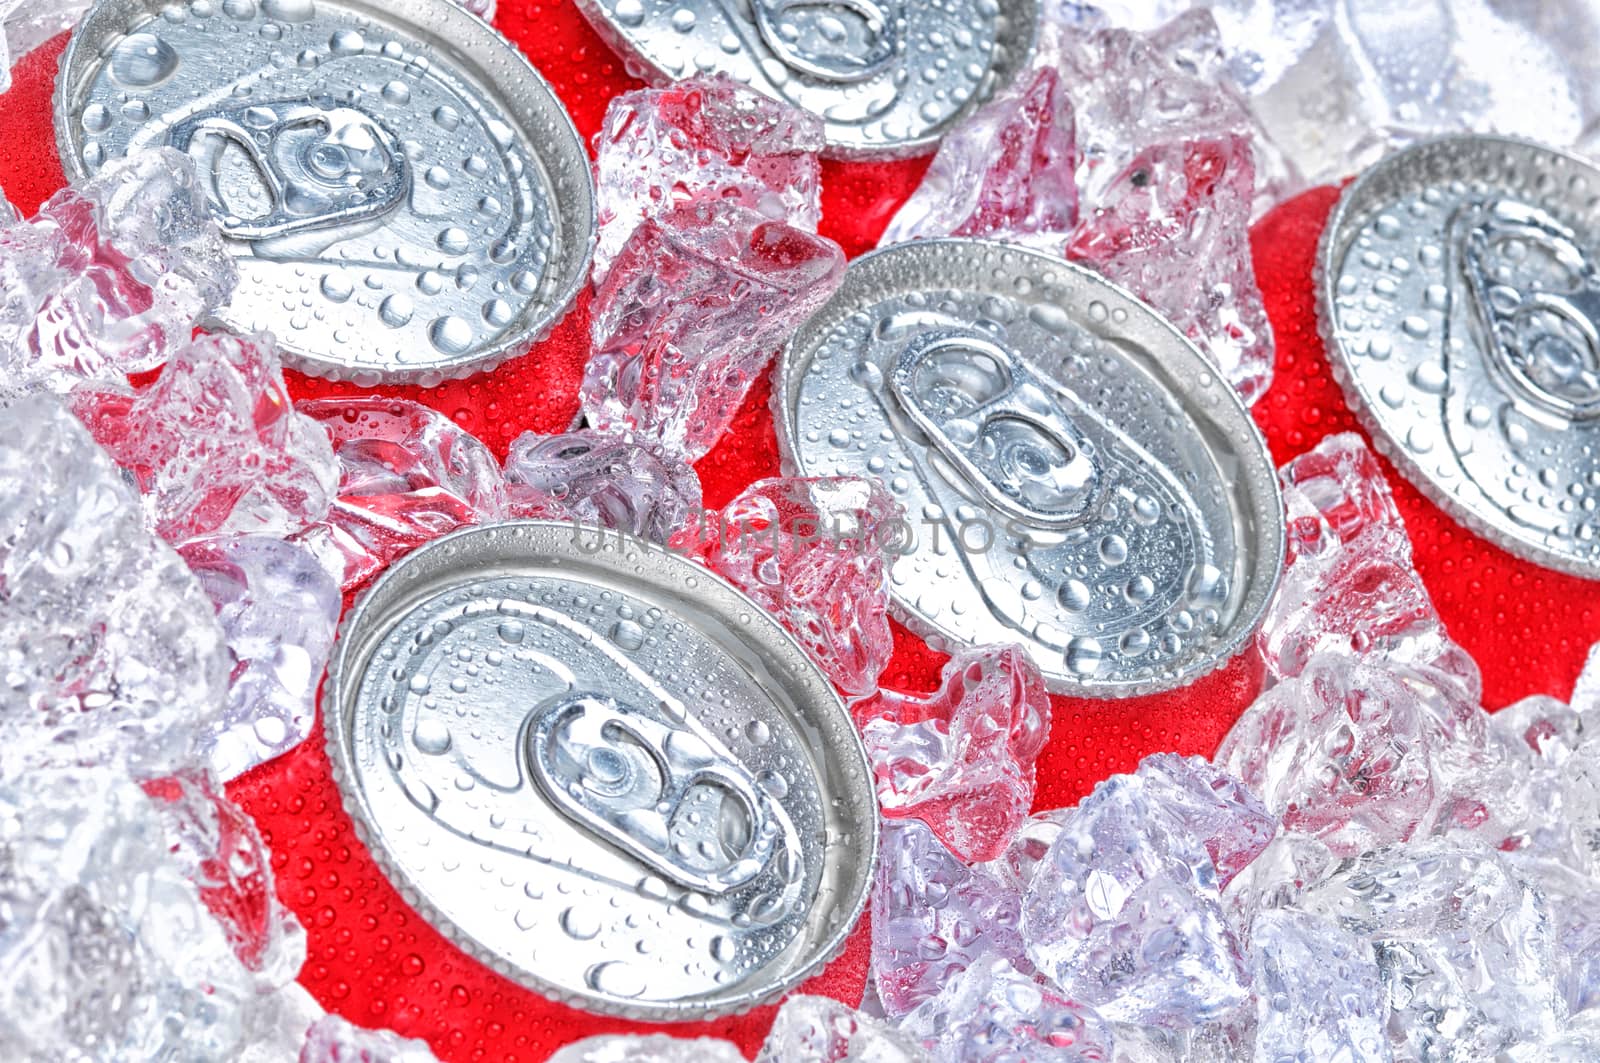 Soda Cans in Ice by sCukrov